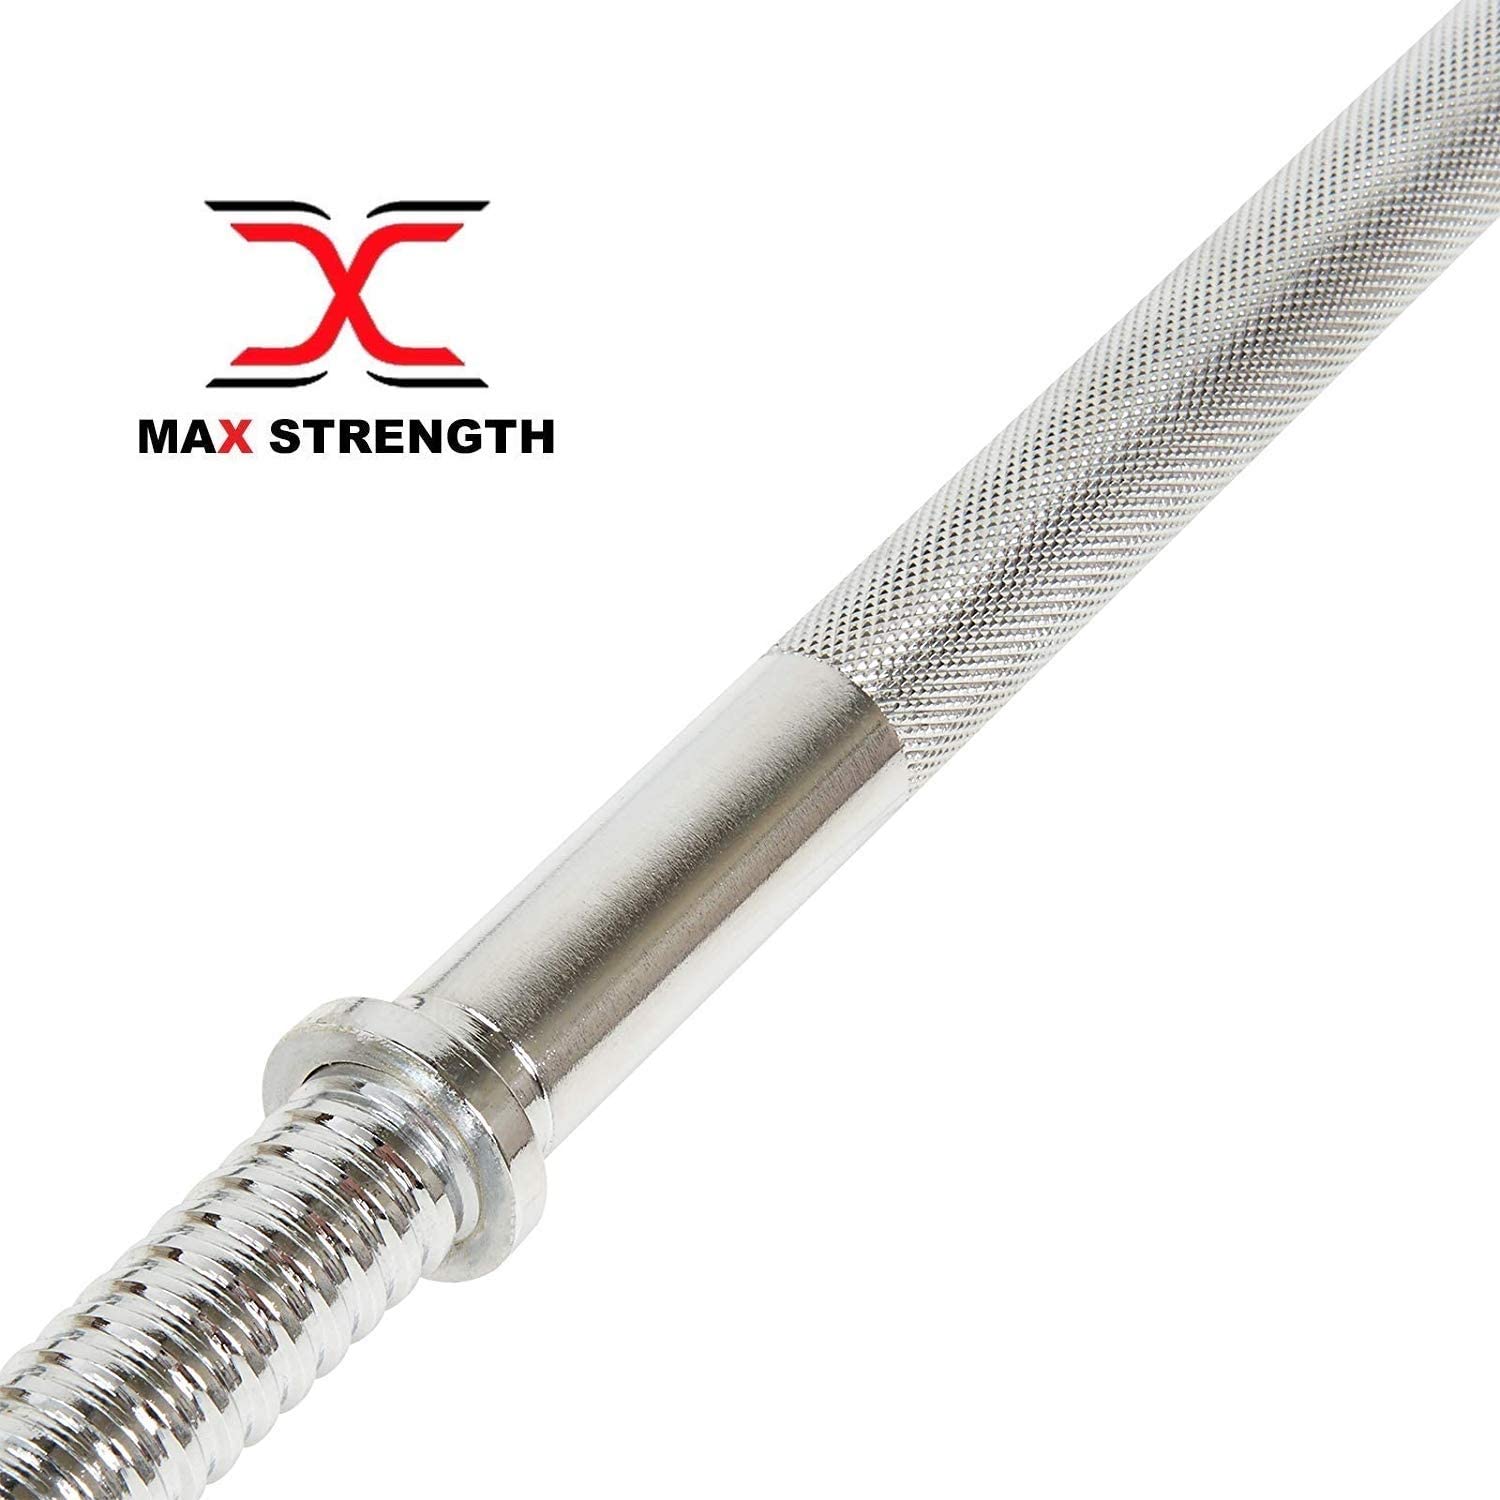 Max Strength- 4 Feet Solid Weight Lifting Weight Bar 120cm/48Inch Chrome Barbell Bar